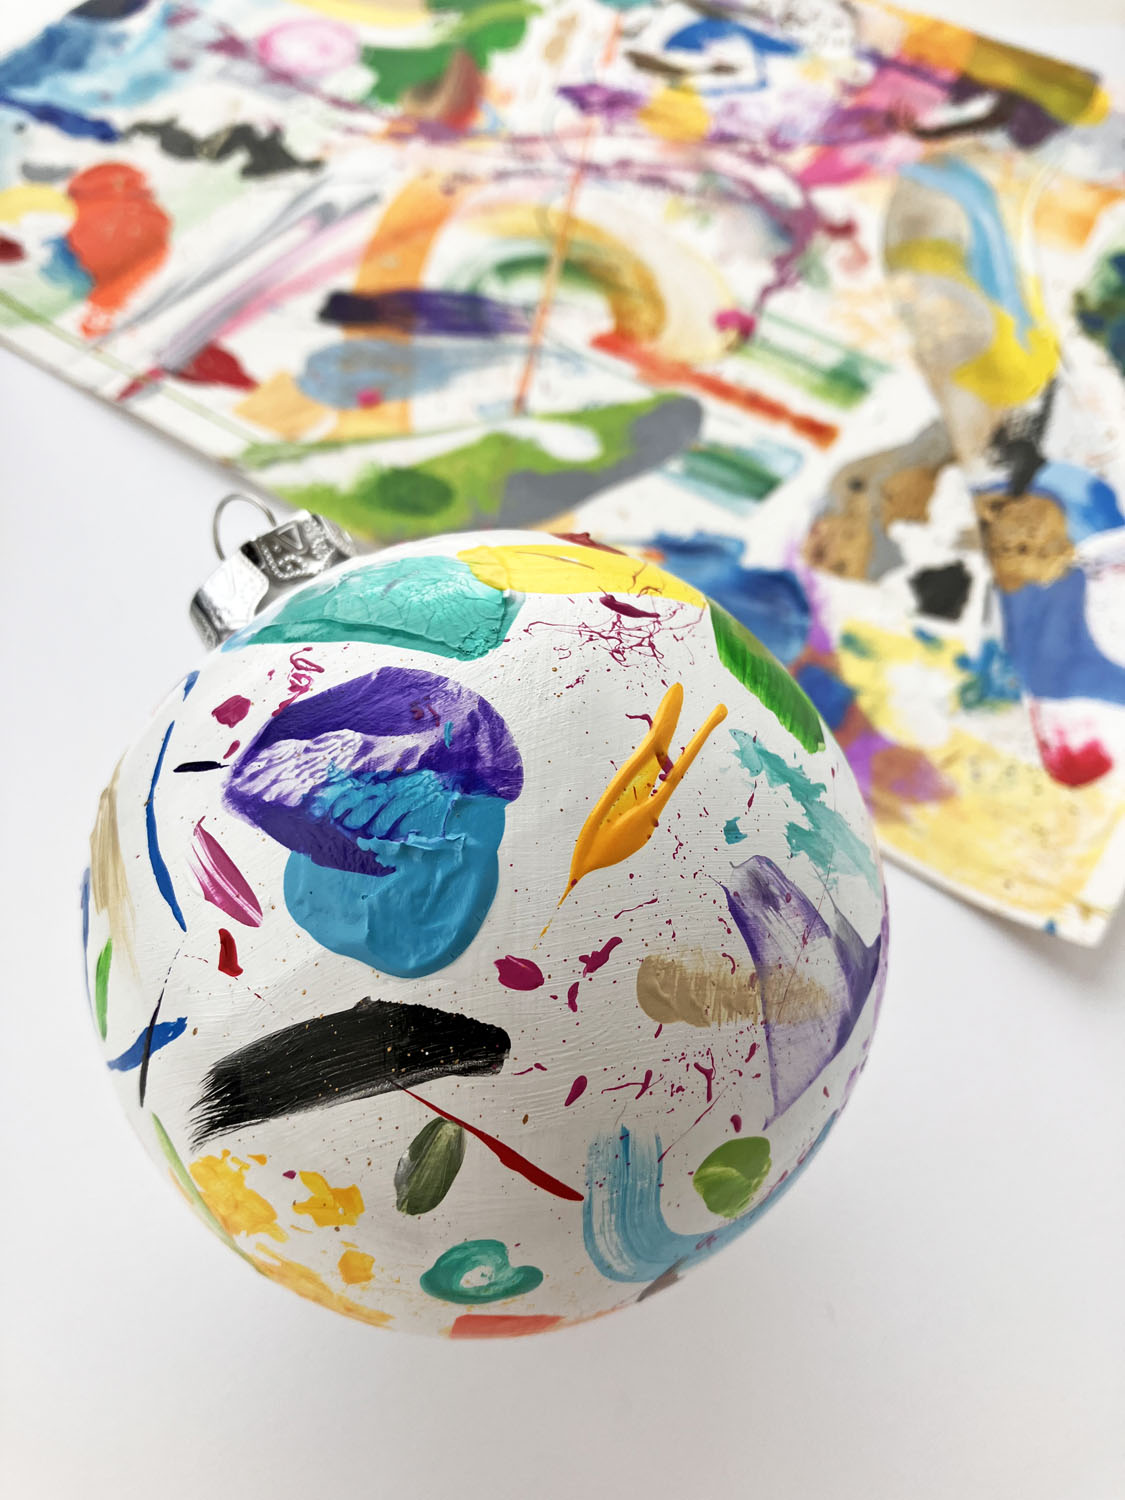 Hand Painted Ceramic Ornament #3 - Multicolor Abstract, White Round Ornament